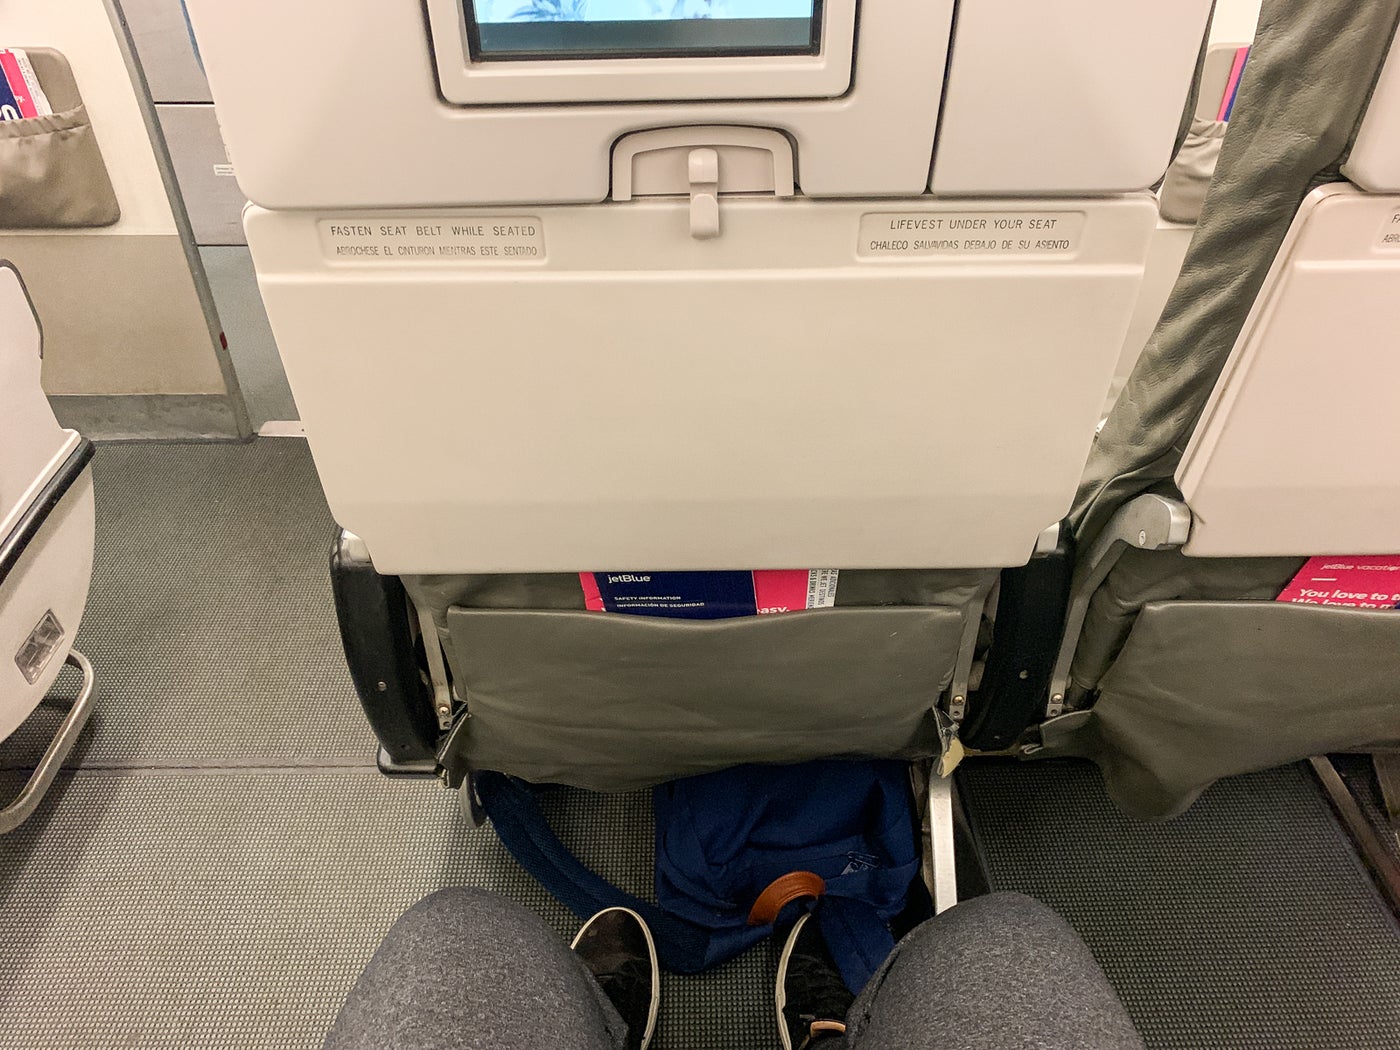 Review: JetBlue Even More Space on the A320 SJU-JFK